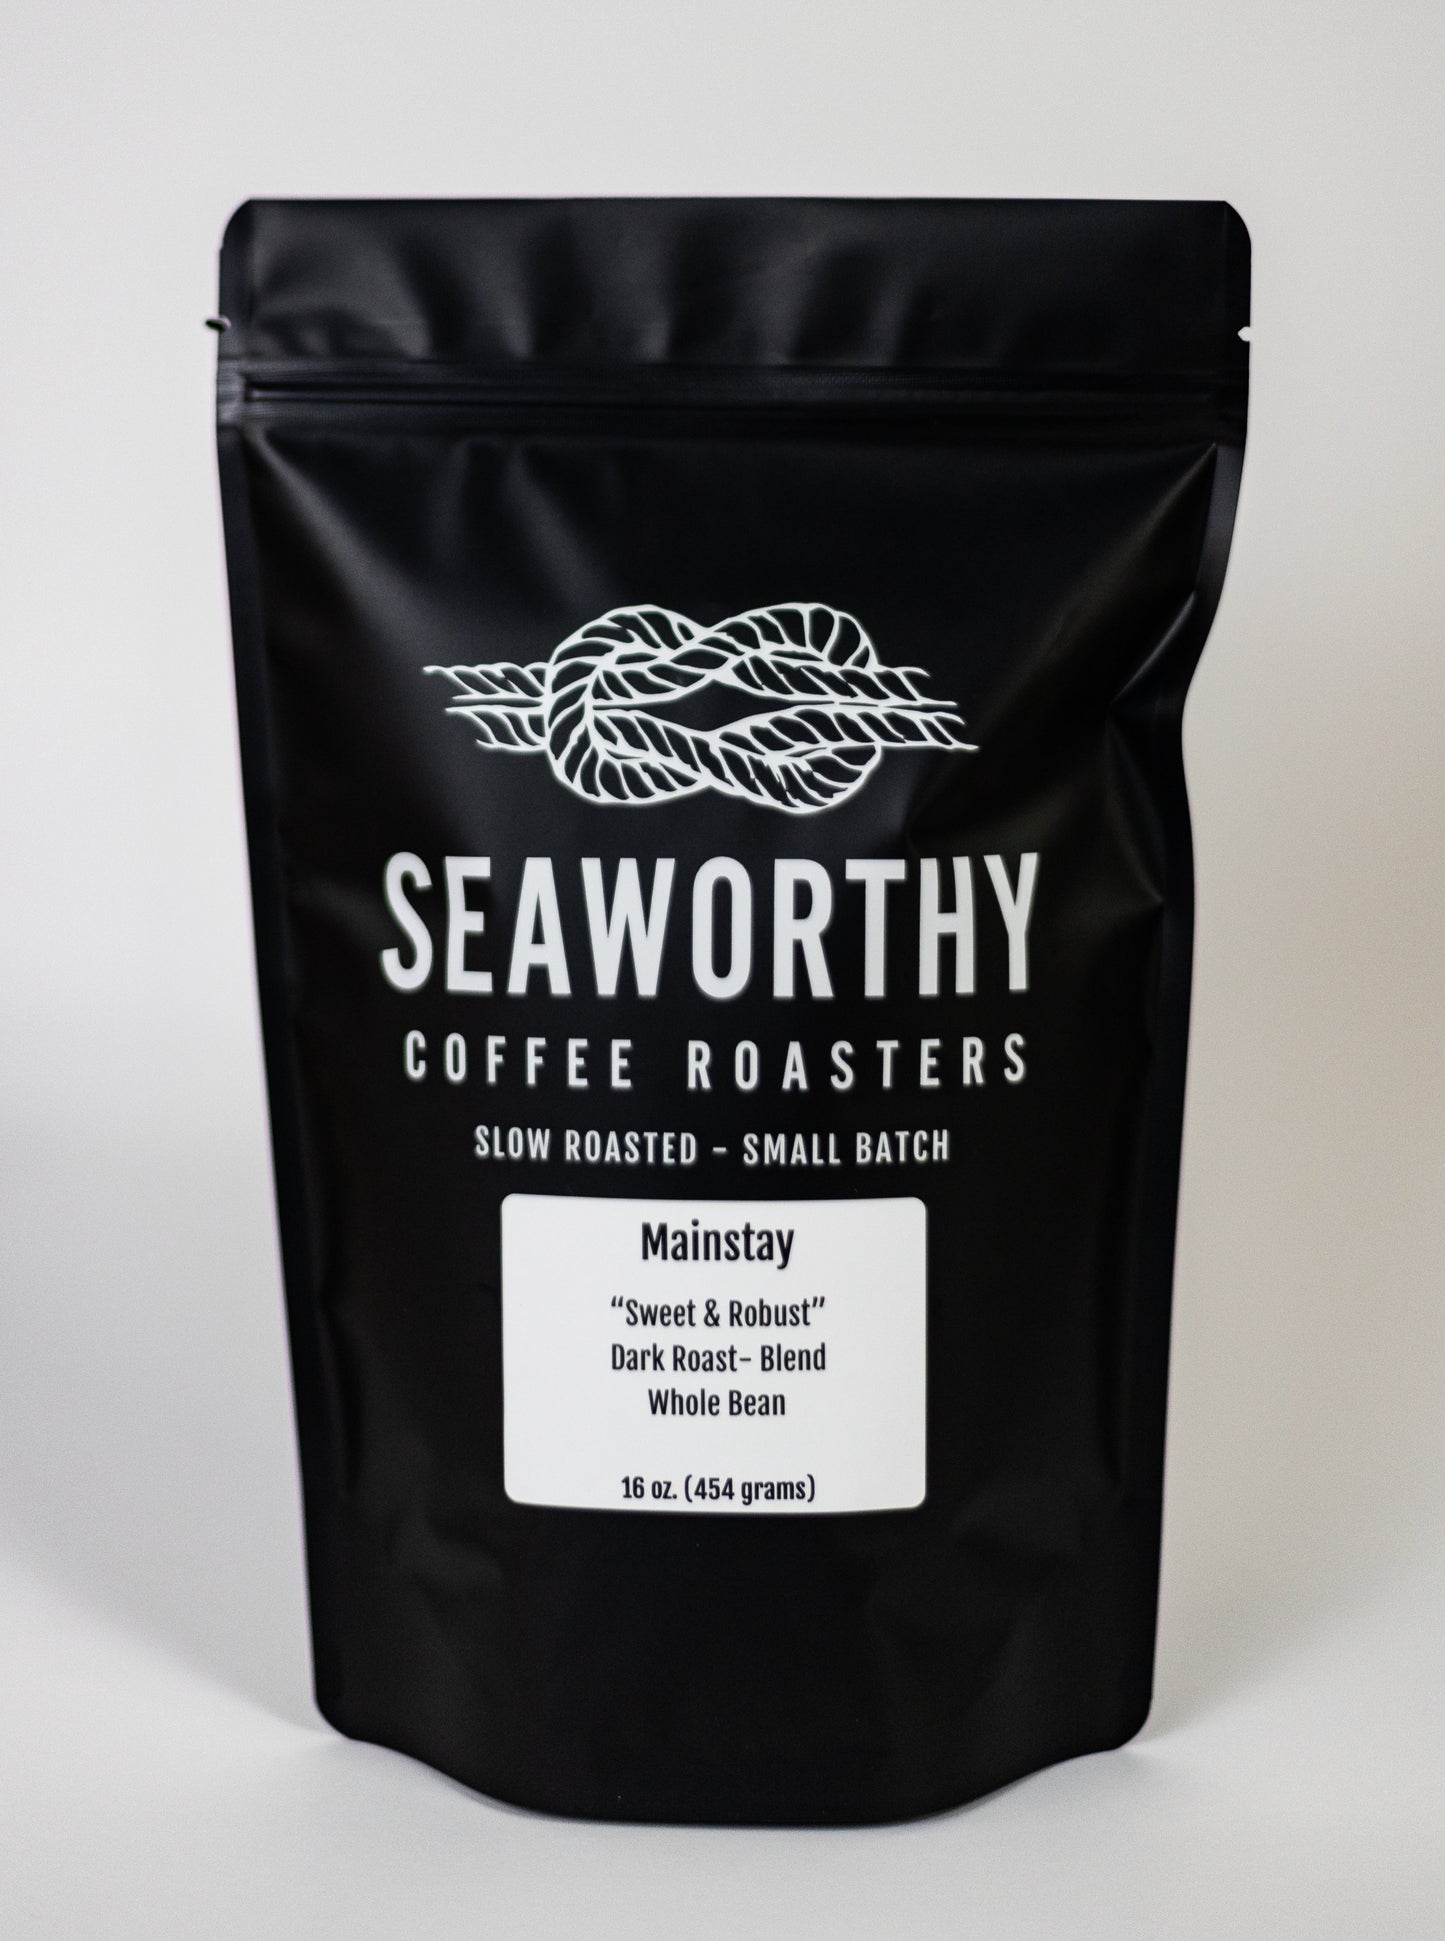 Seaworthy slow roasted, small batch coffee. On a ship, the mainstay serves as part of the rigging that helps to stabilize the main mast. The mainstay acts as the chief support and makes it possible for the ship to get underway, much like this flavorful roast will do for you. This rich blend boasts balanced sweet and bold flavor notes, with a medium body and low acidity.